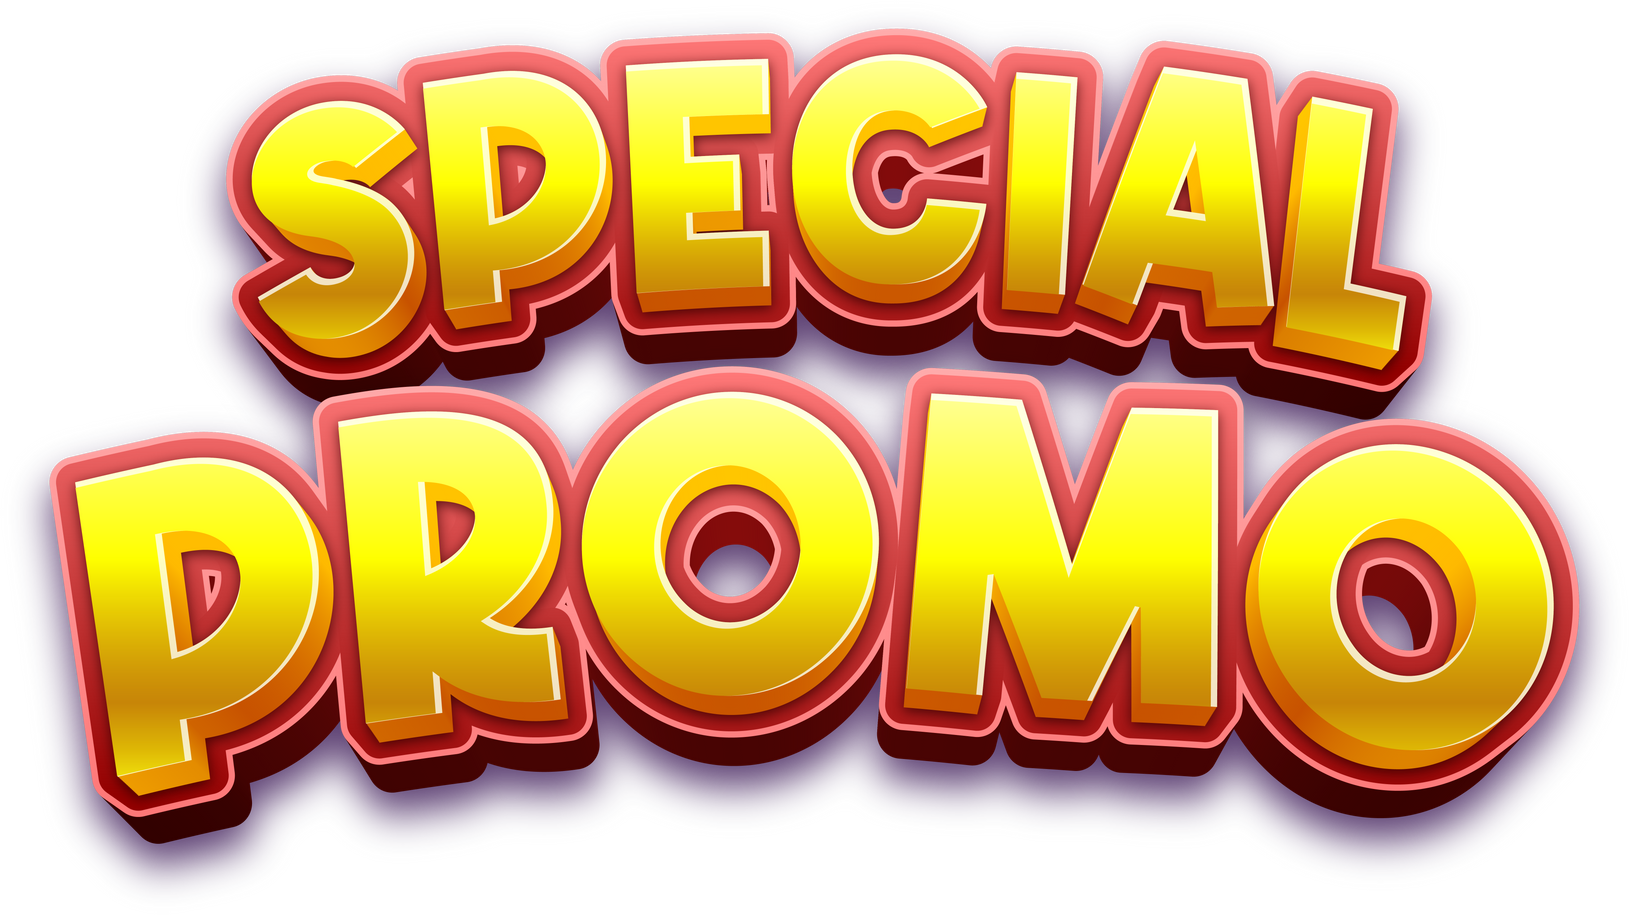 Special Promo Lettering